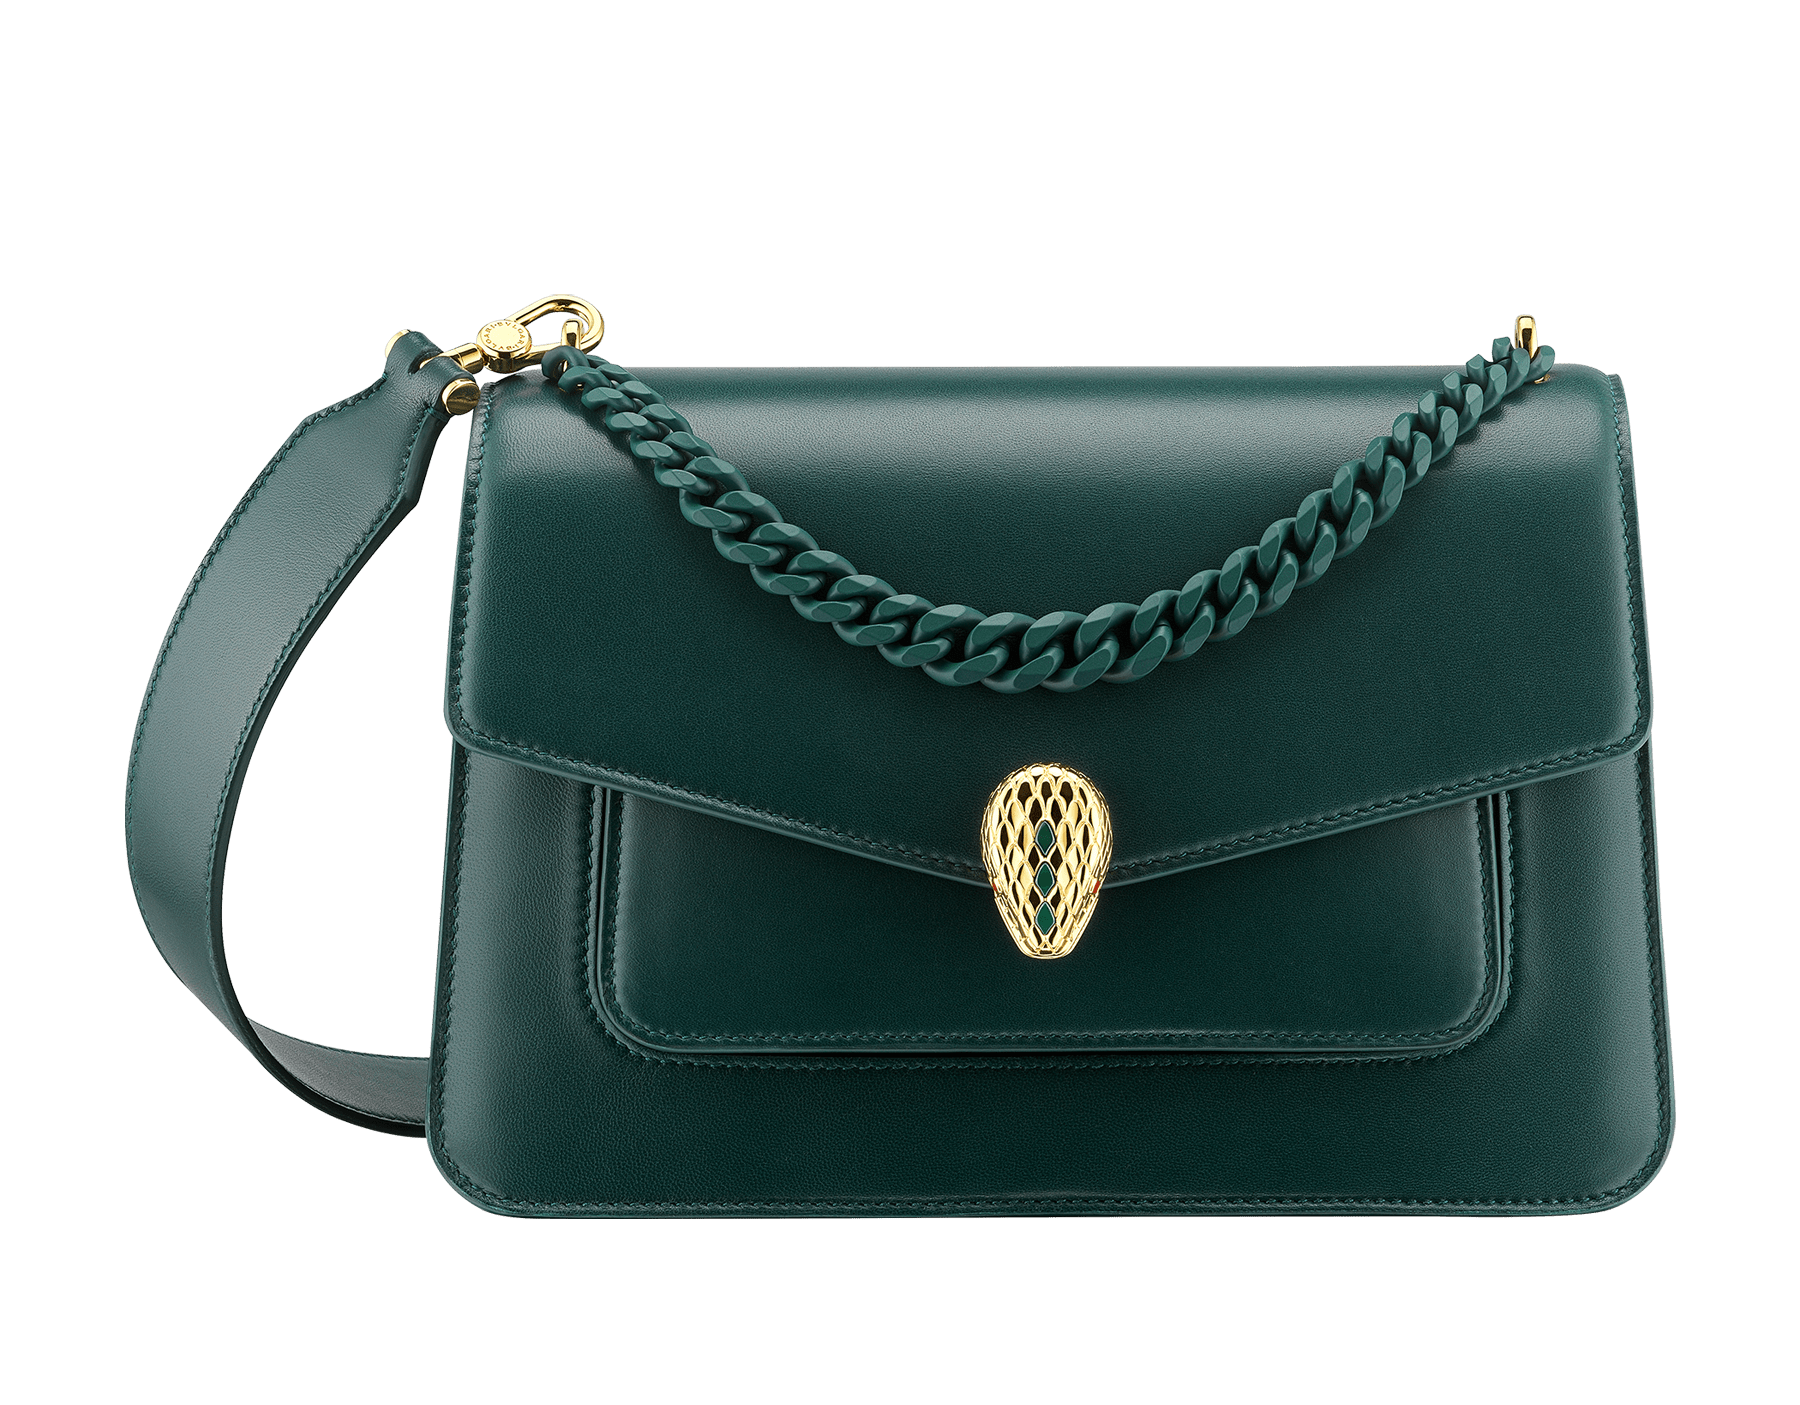 "Serpenti Forever" maxi chain crossbody bag in black nappa leather with black nappa leather inner lining. New Serpenti head closure in dark ruthenium-plated brass and finished with small black onyx scales in the middle and red enamel eyes. 1138-MCNb image 1